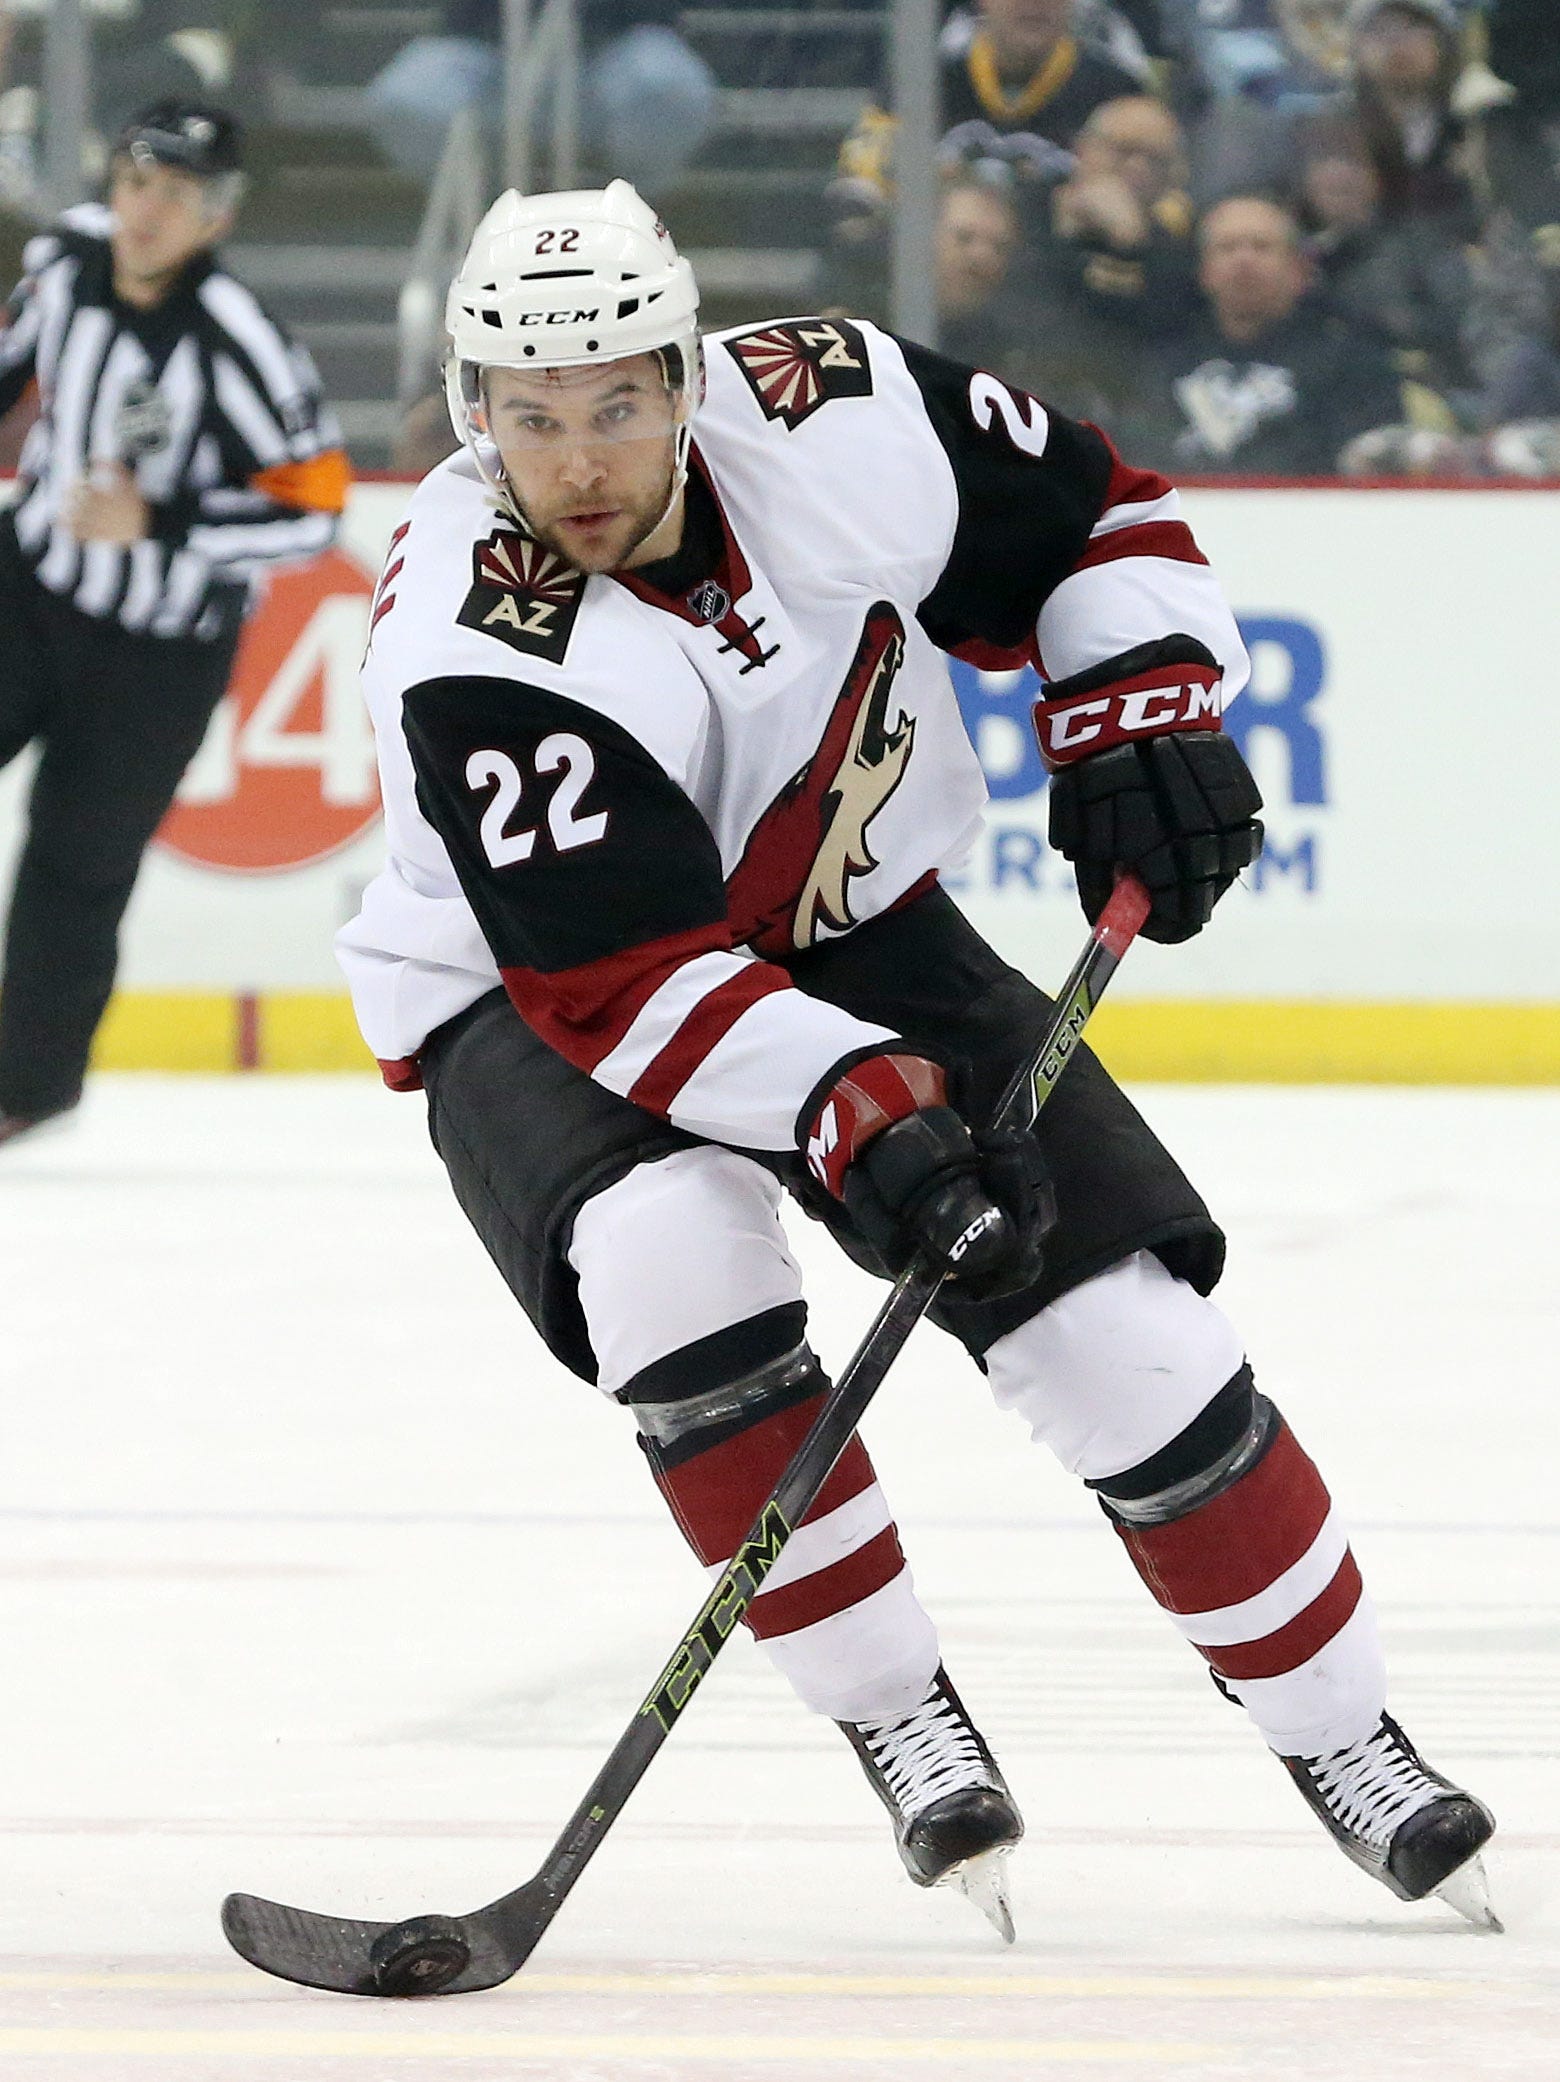 Ex-NHL player Craig Cunningham makes stunning recovery from heart attack and amputation